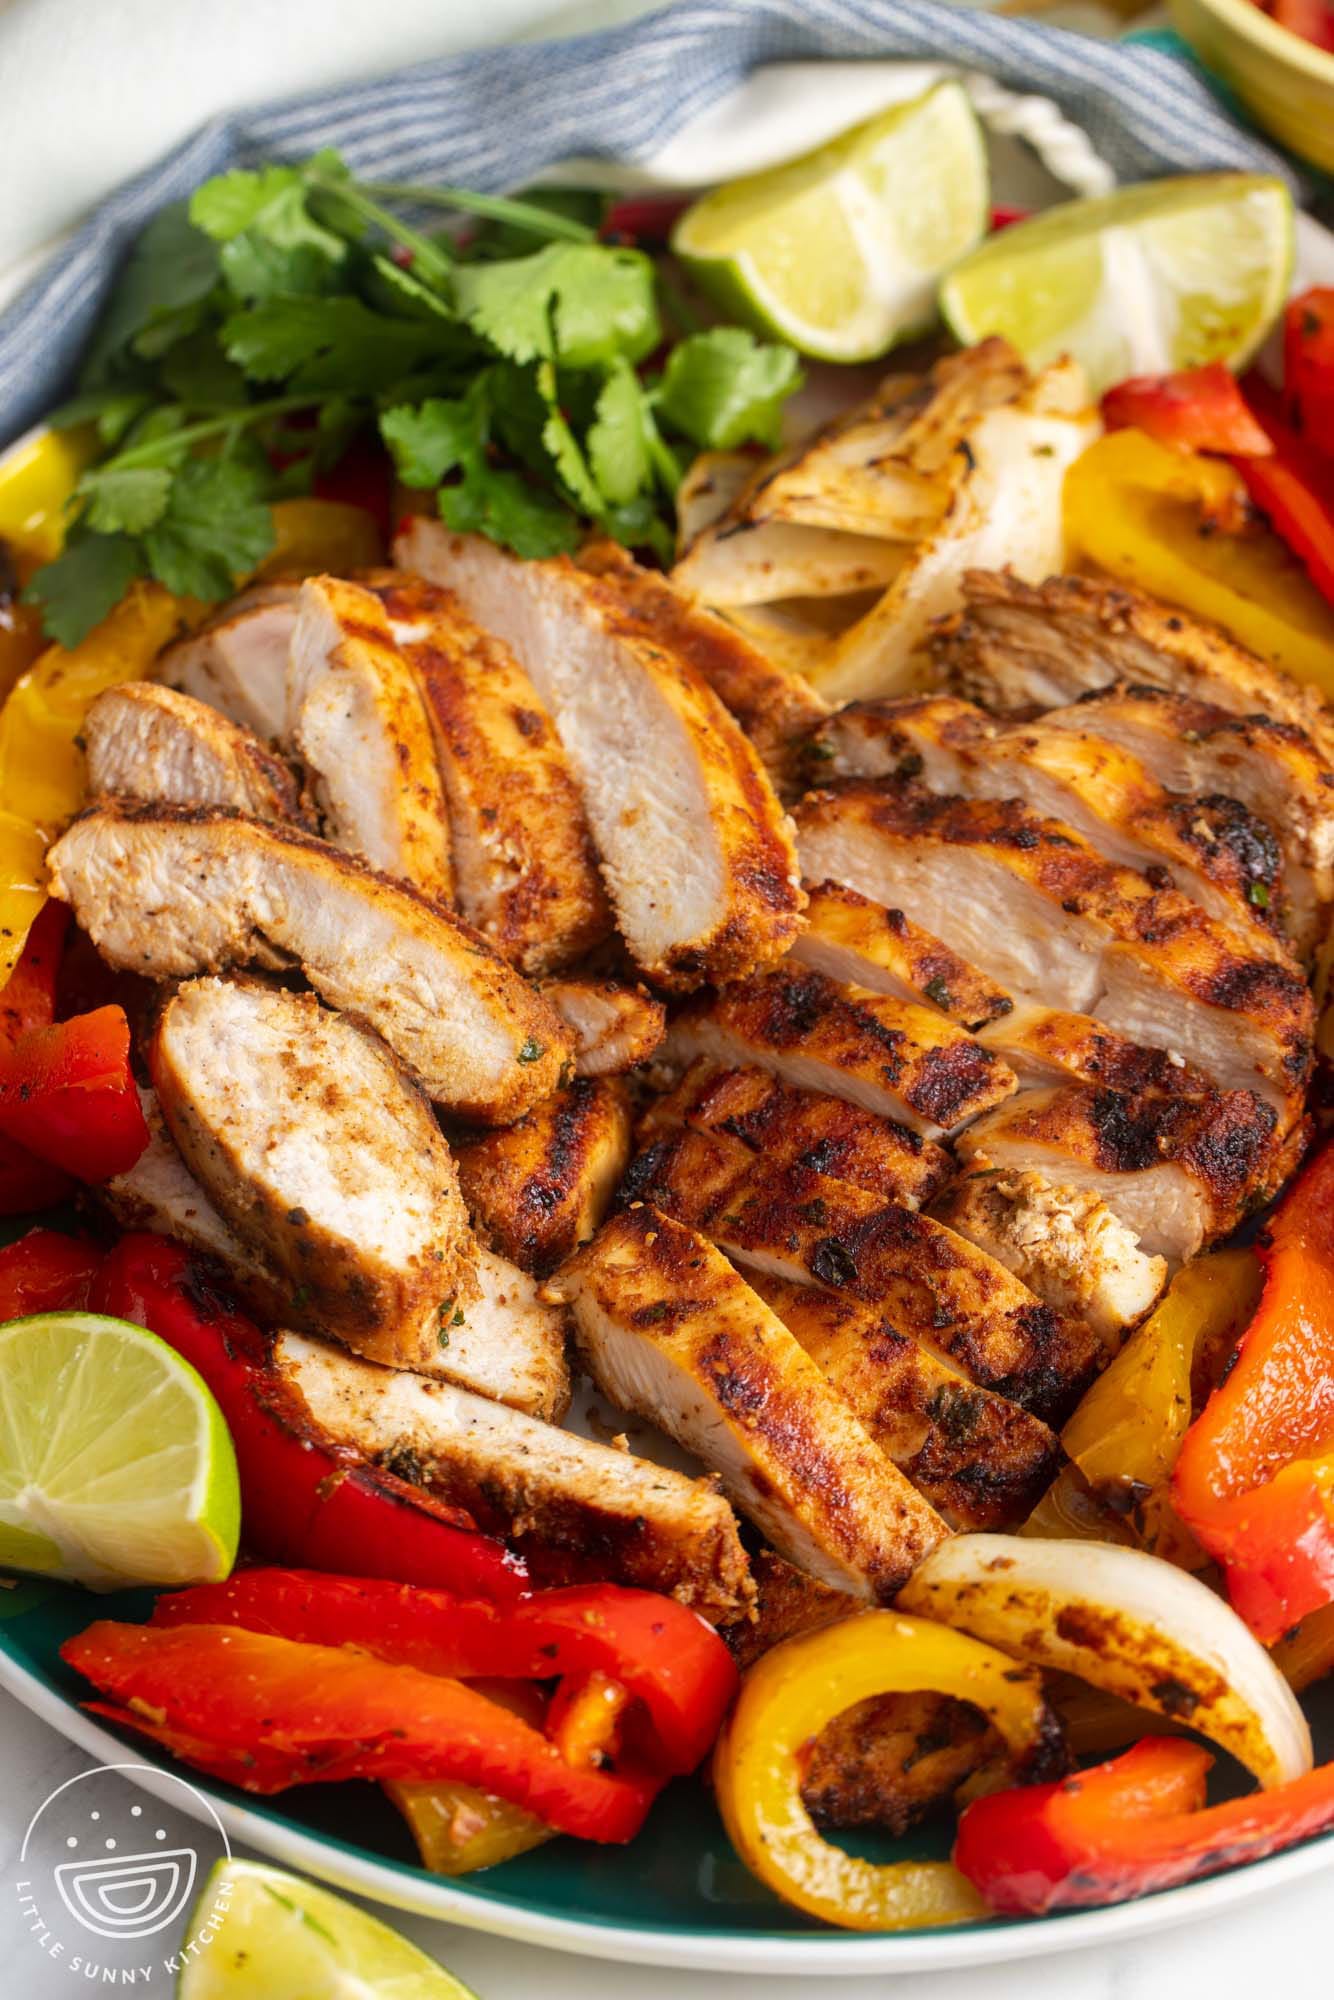 grilled chicken fajitas on a plate, garnished with fresh cilantro and lime wedges.